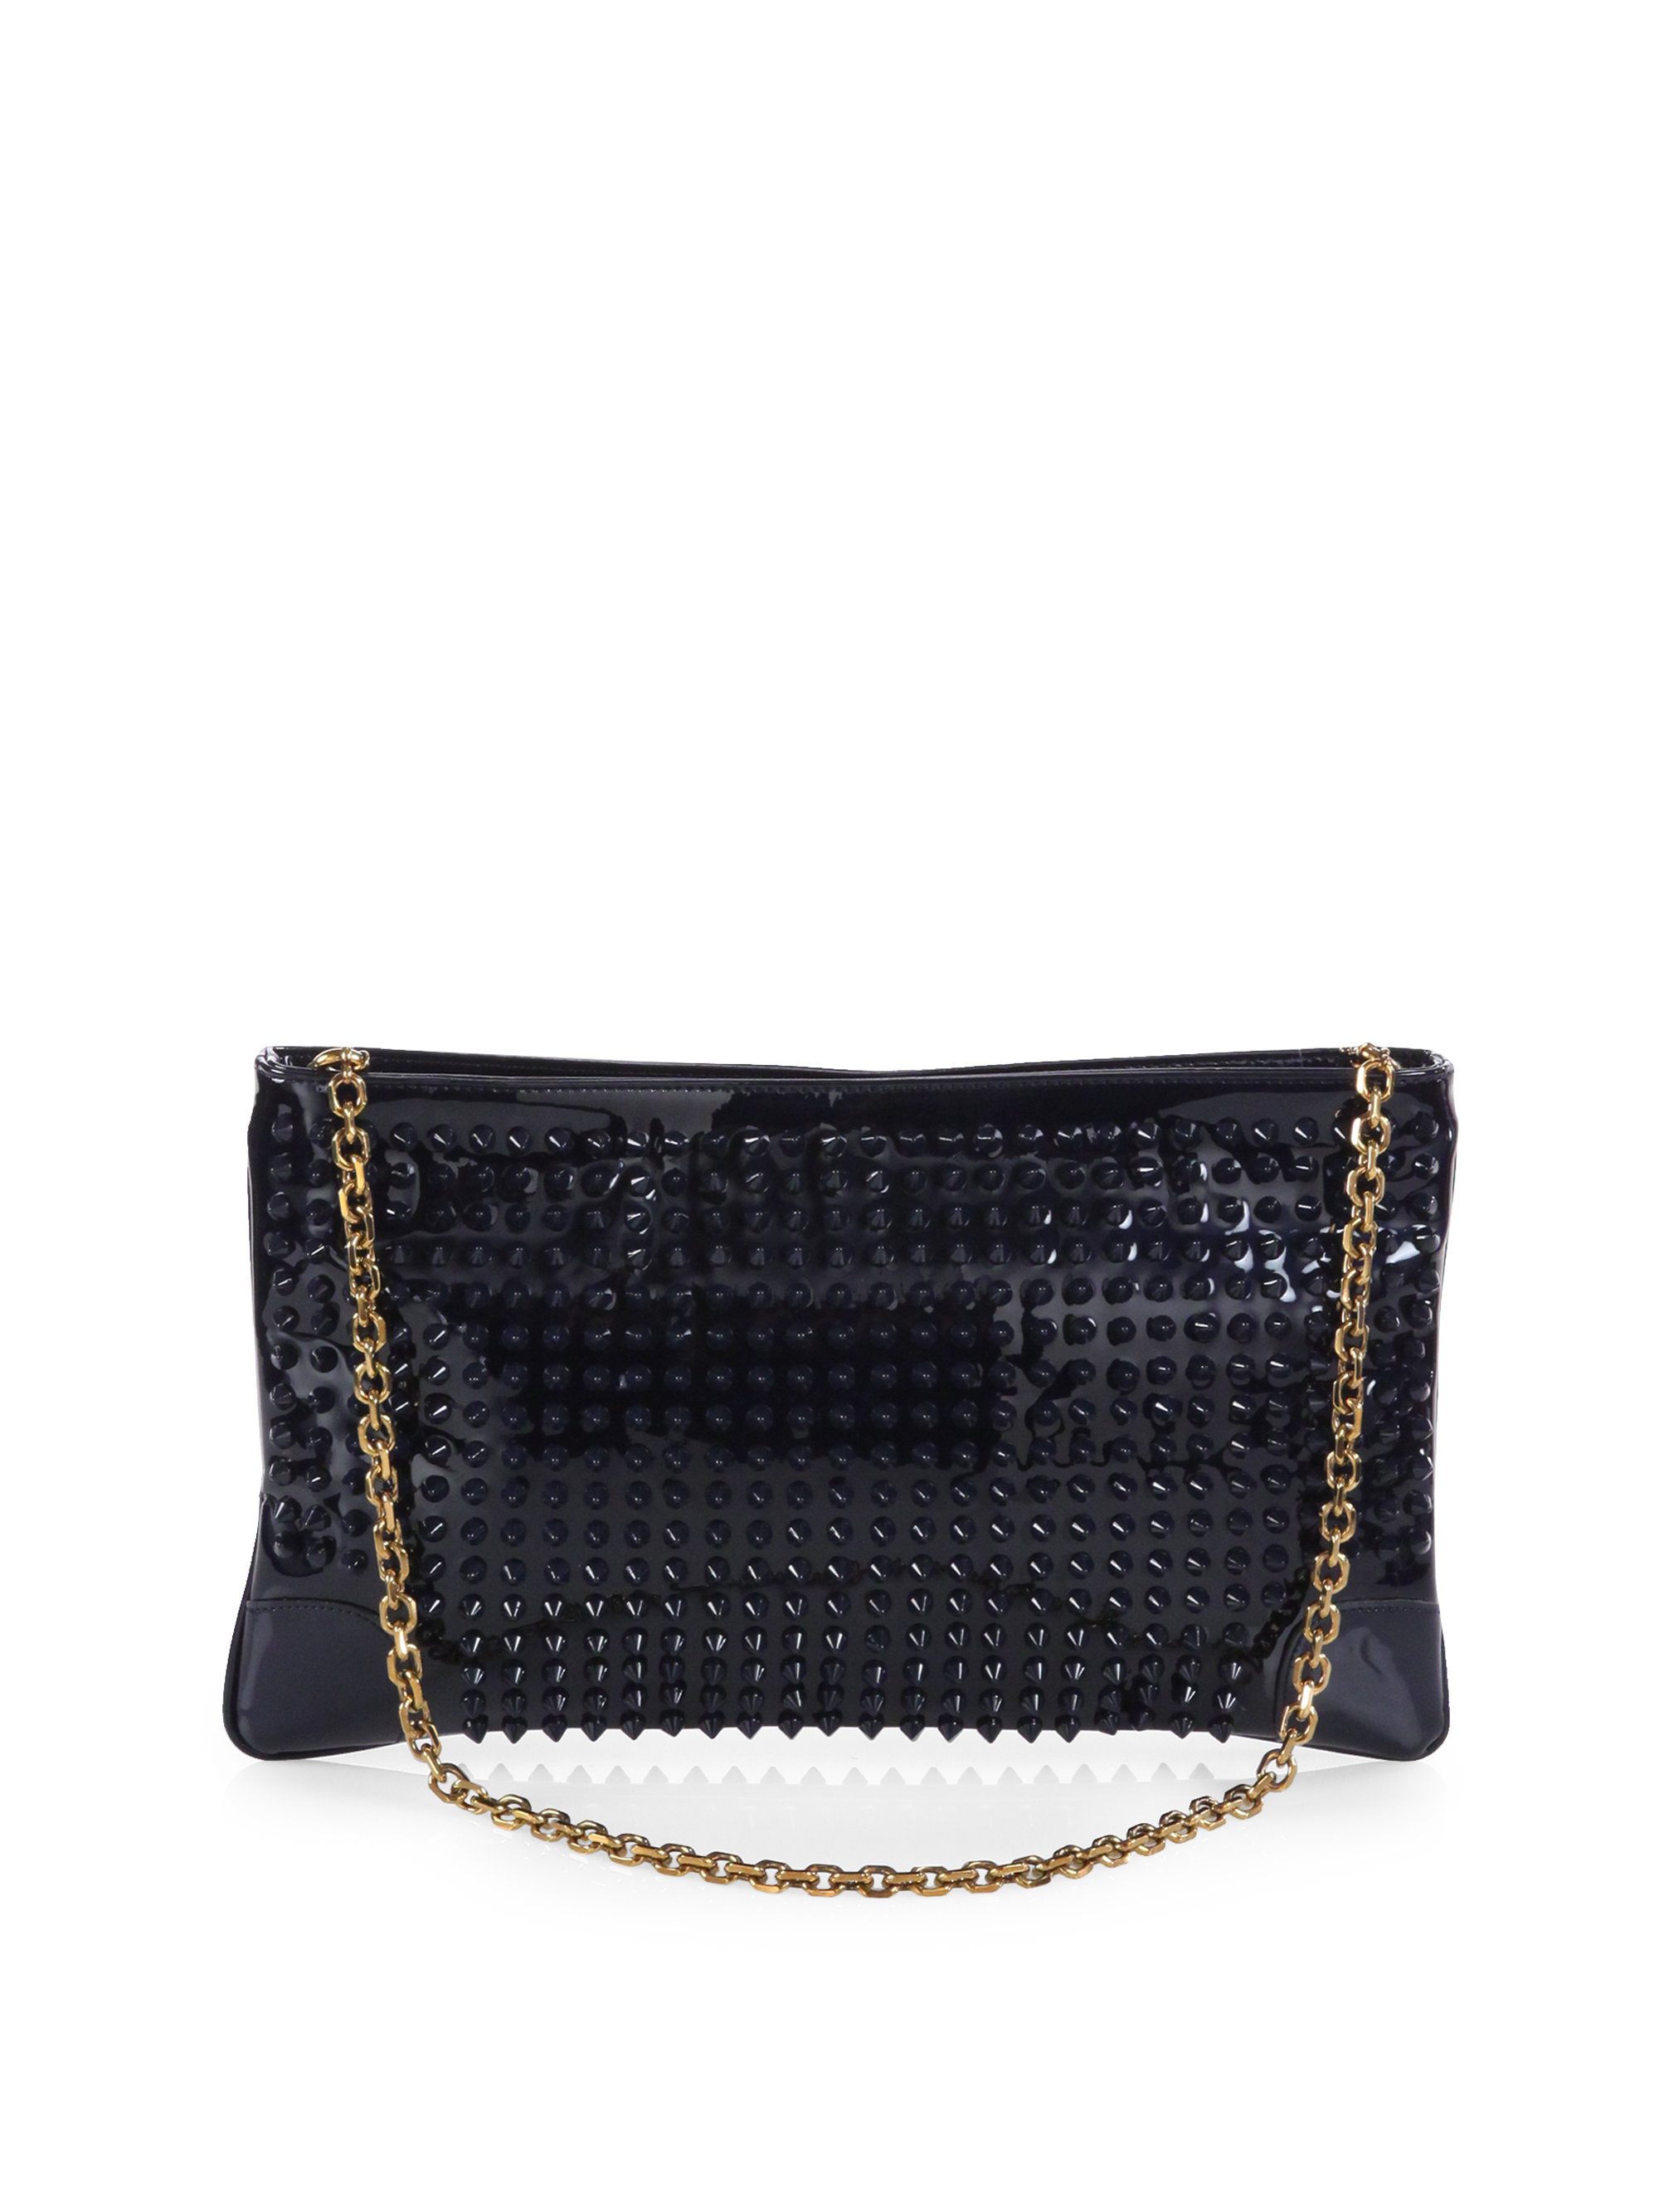 Christian louboutin Studded Patent Leather Convertible Clutch in Black ...